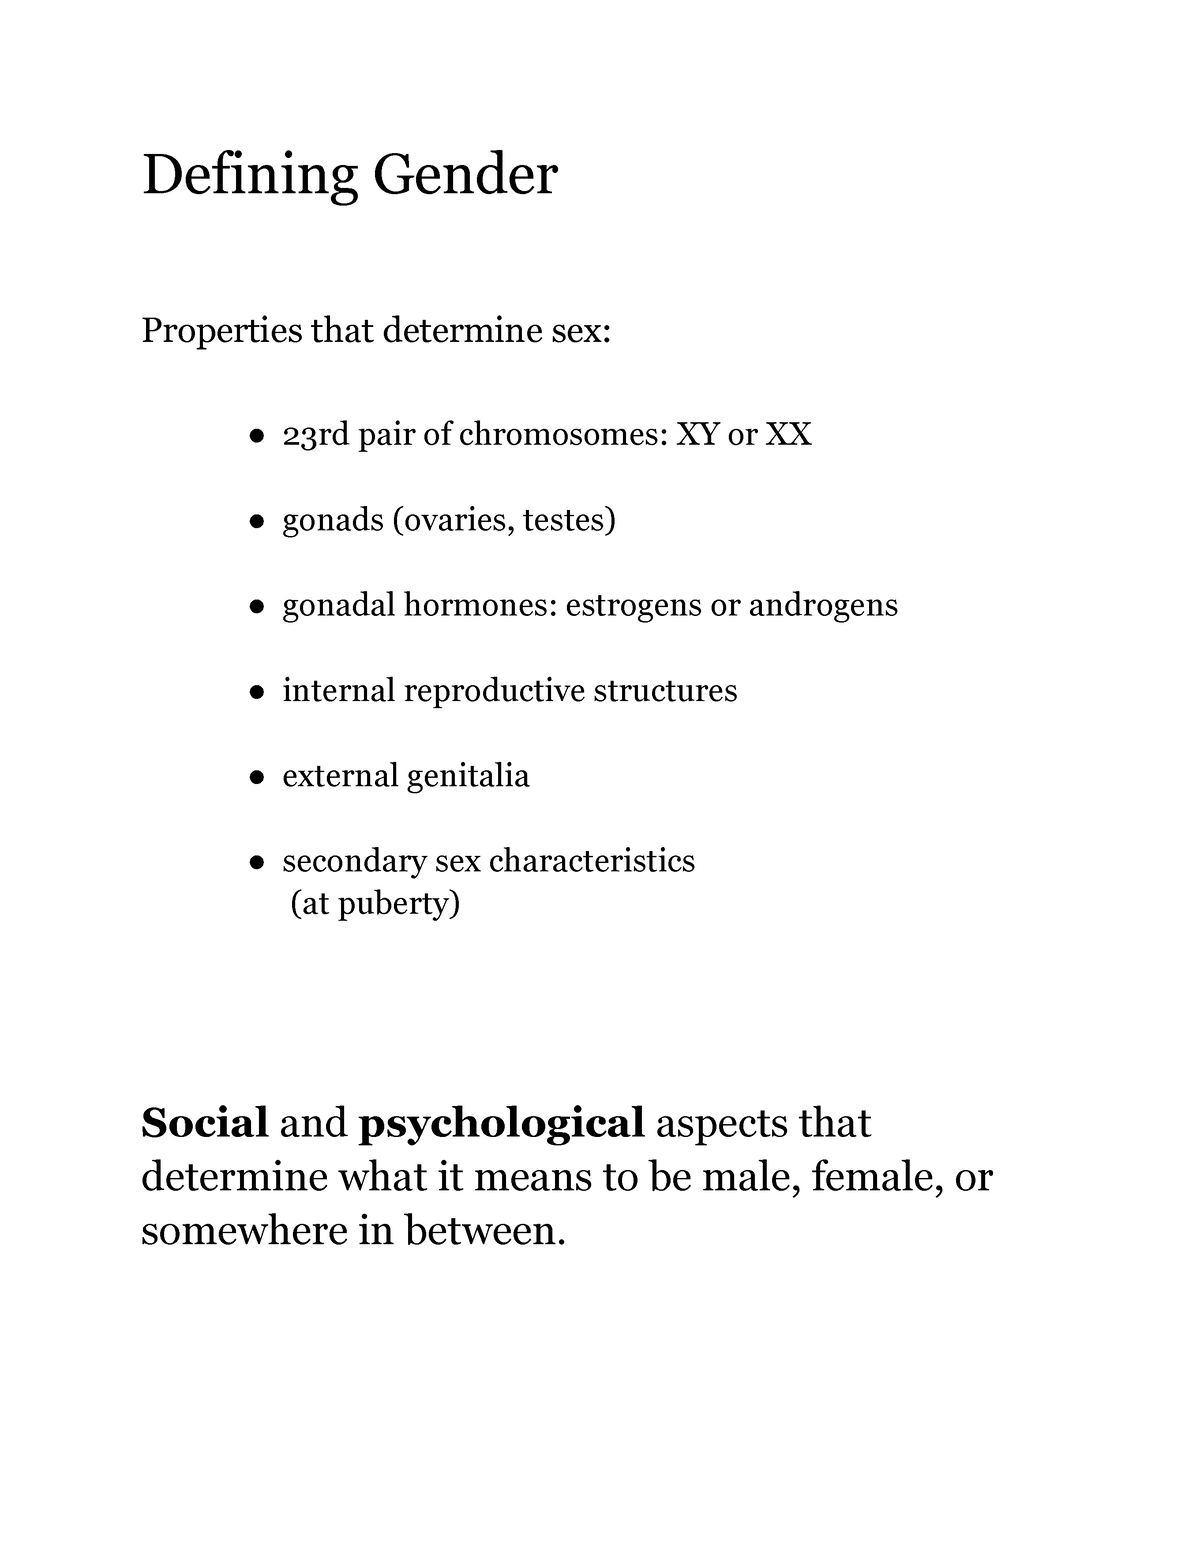 Psych chapter 11 - Defining Gender Properties that determine sex ○ 23rd pair of chromosomes XY or image